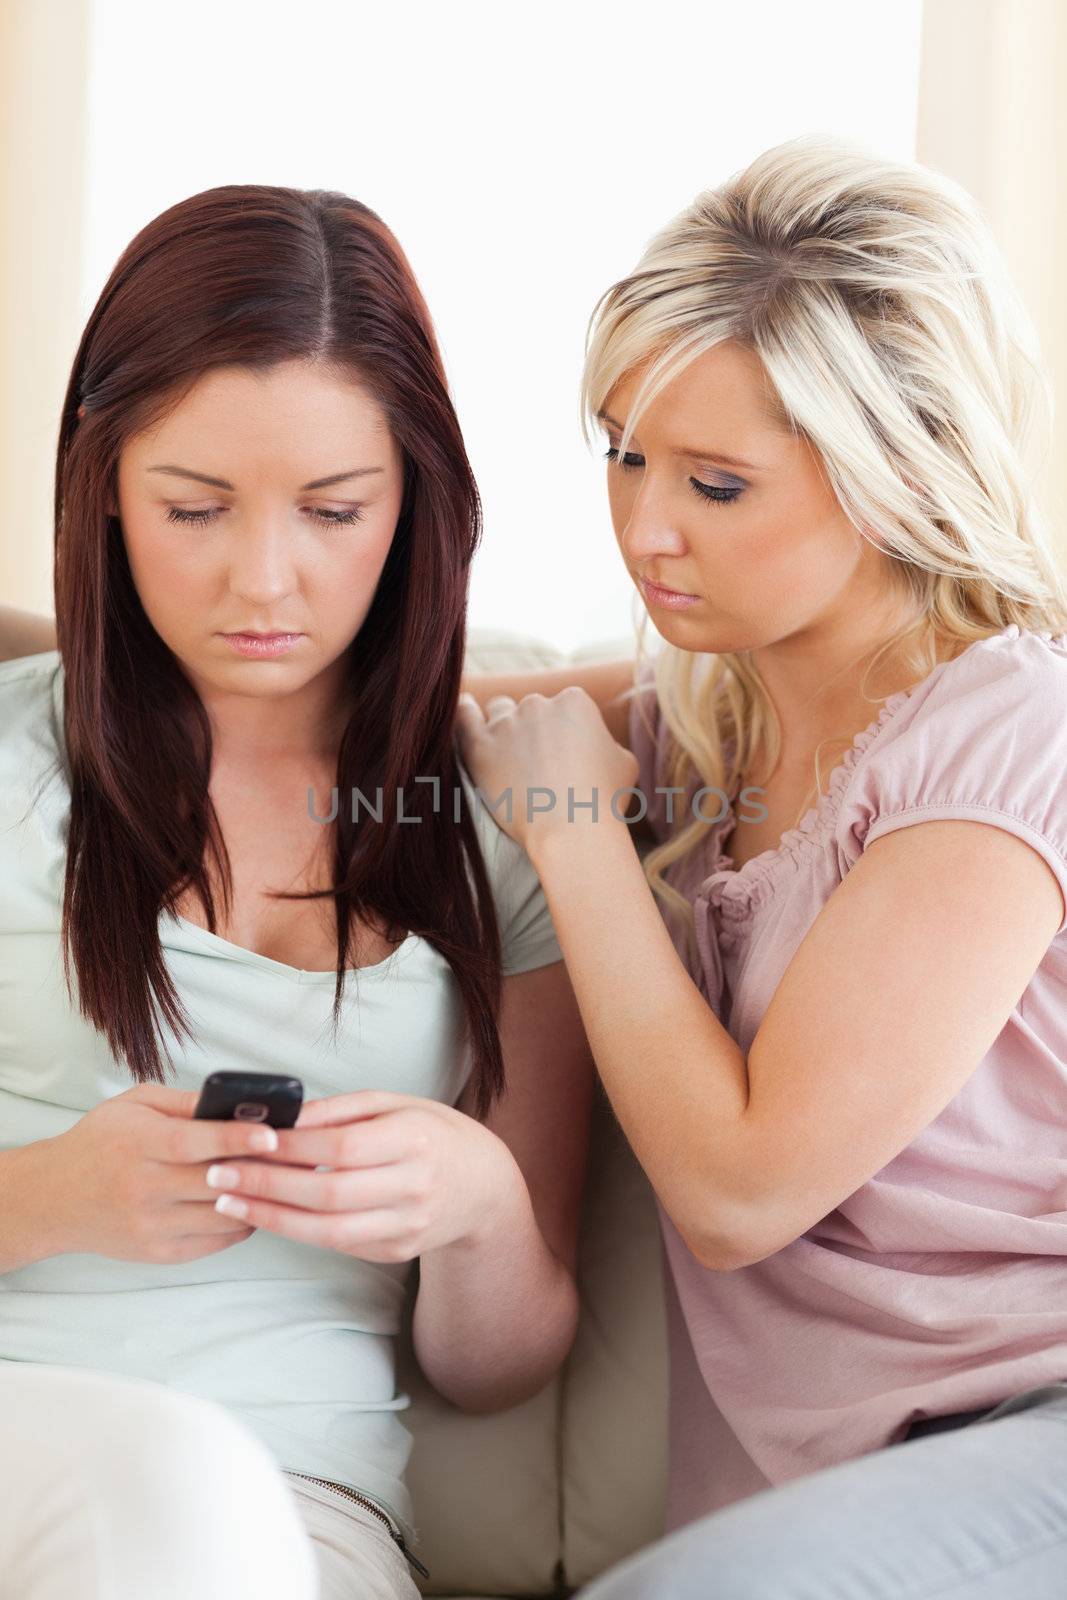 Shocked Women sitting on a sofa with a phone in a living room